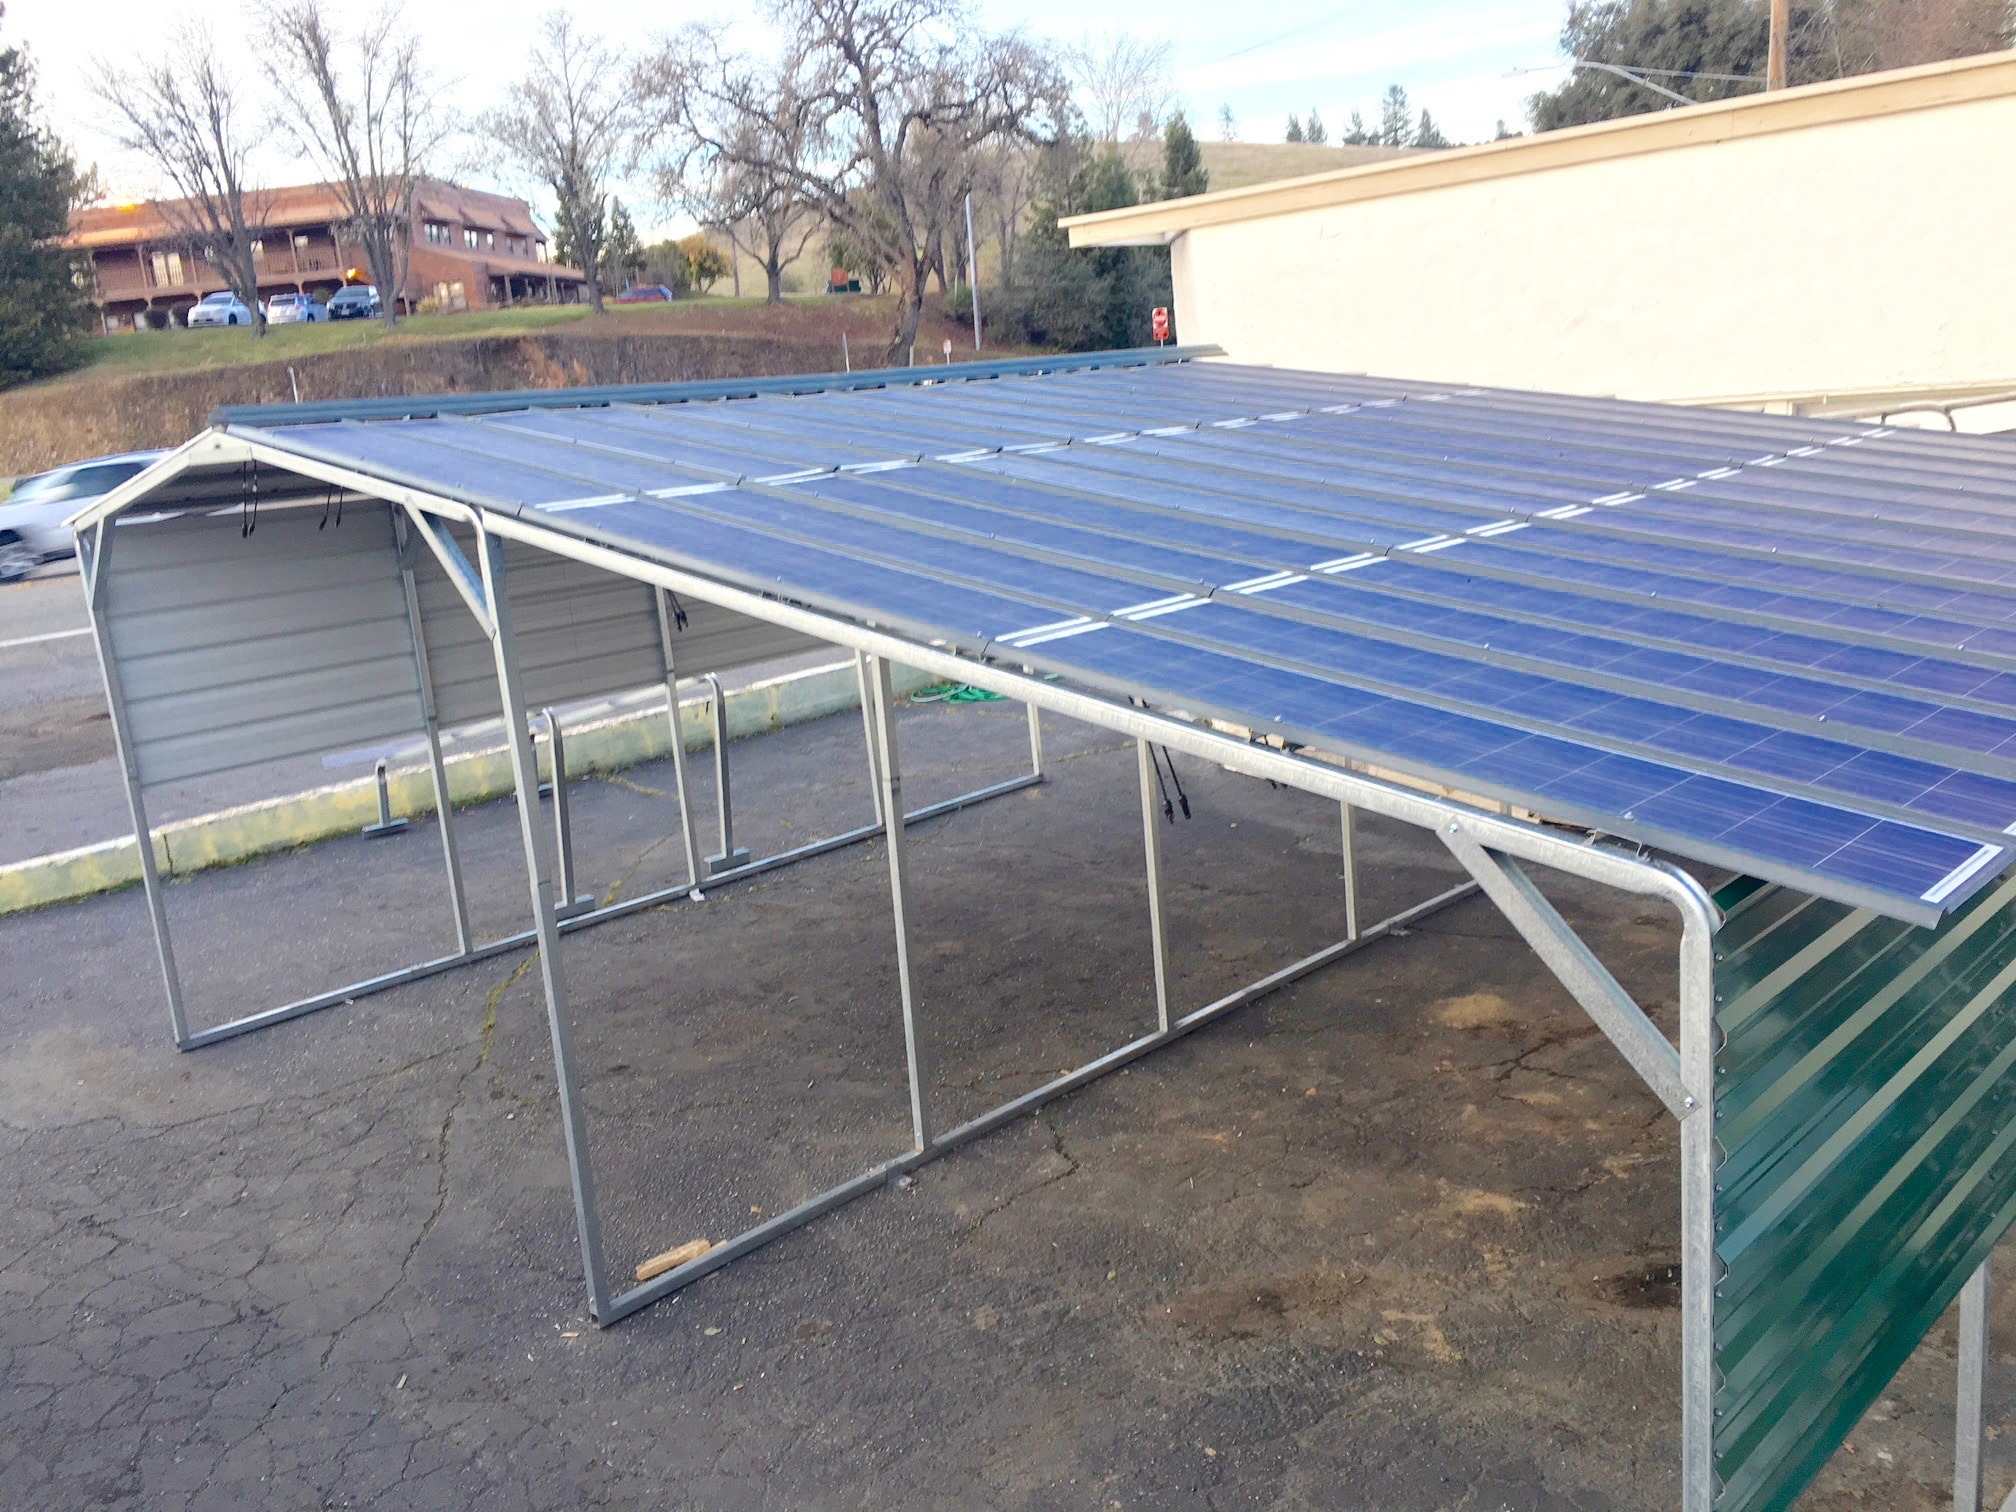 SunnyCal Solar provides solar carport for homes and businesses - Roof View Lean To 2a 1